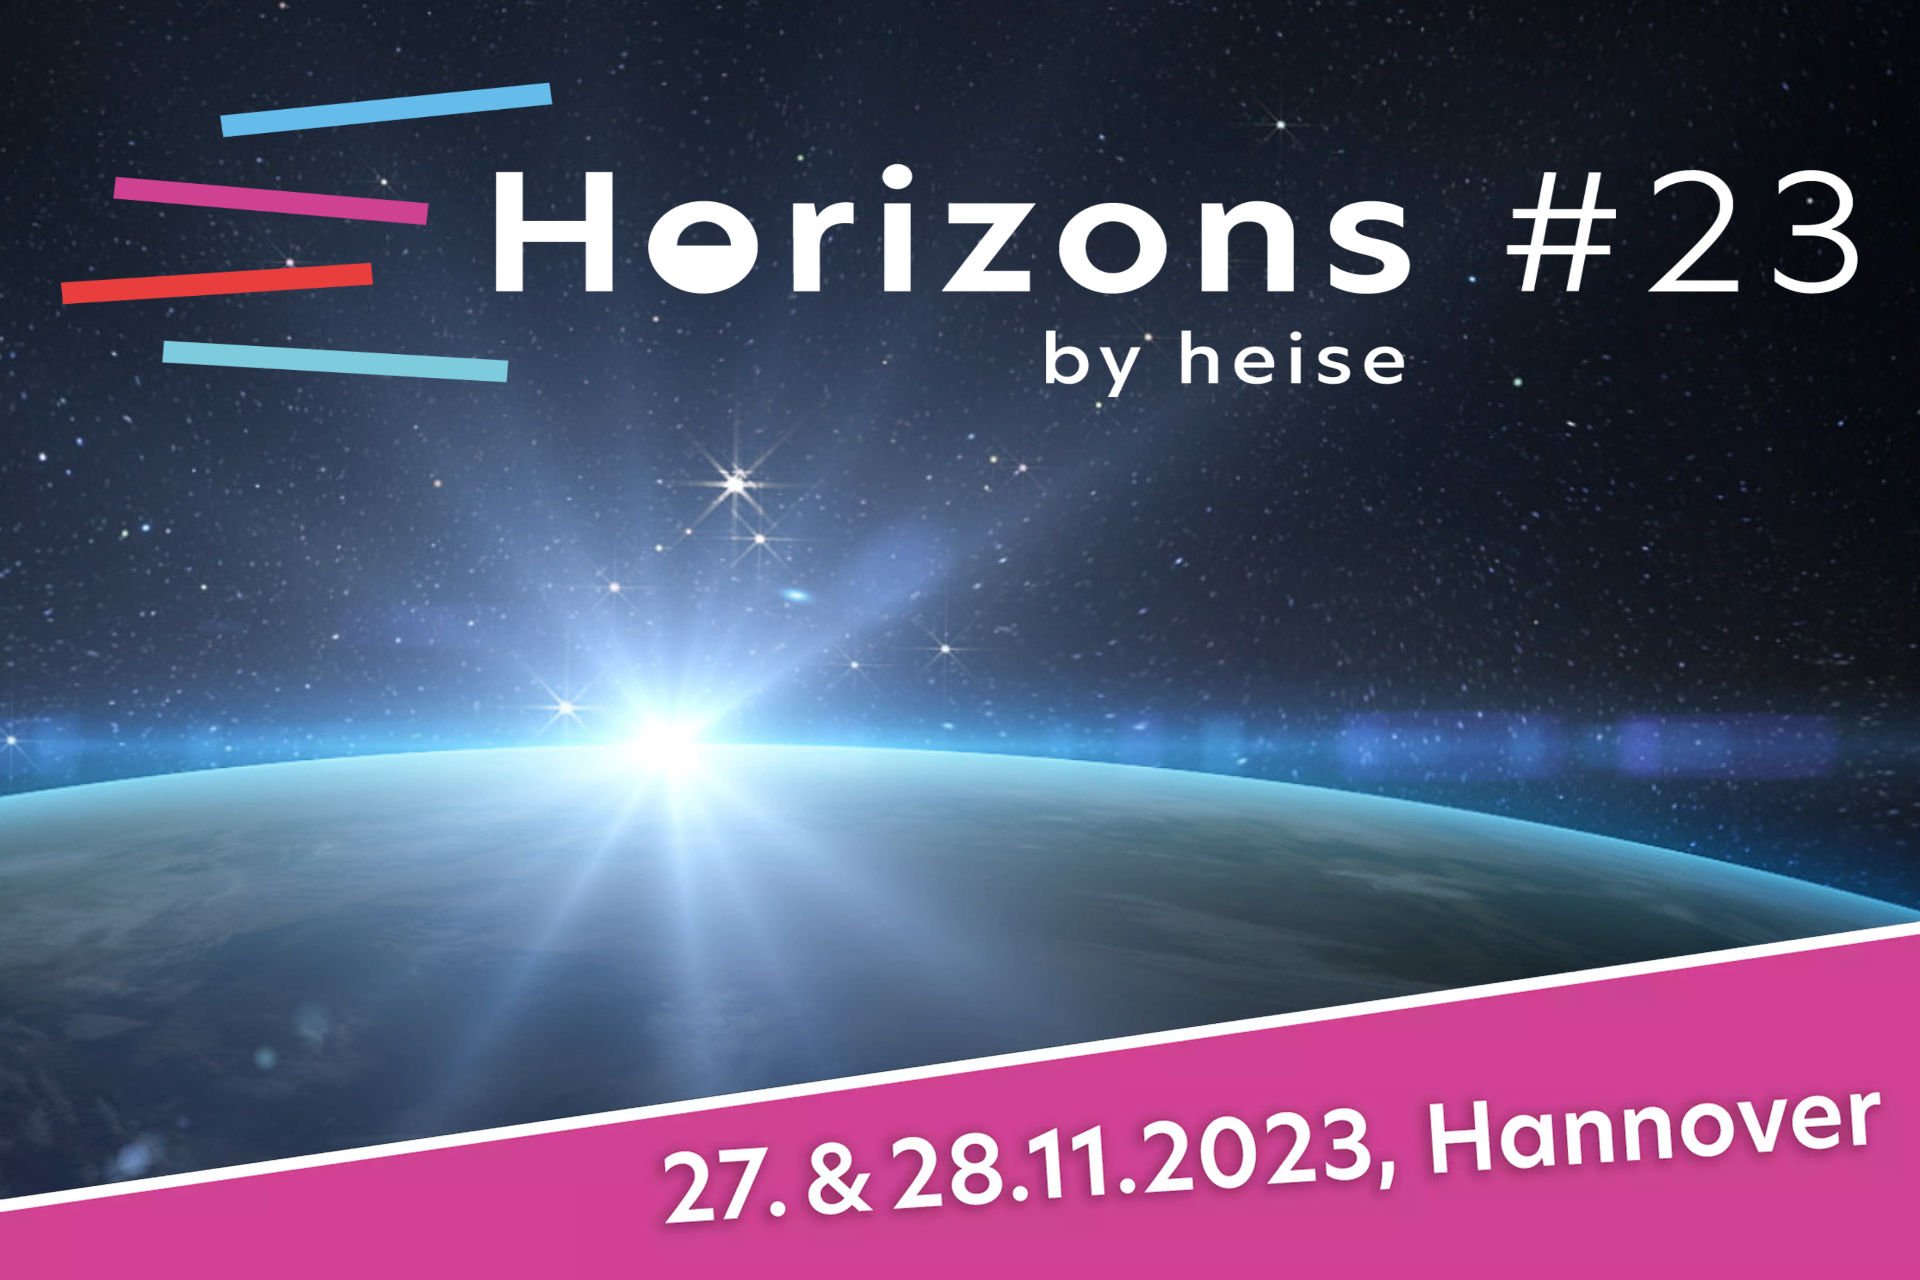 Horizons by heise